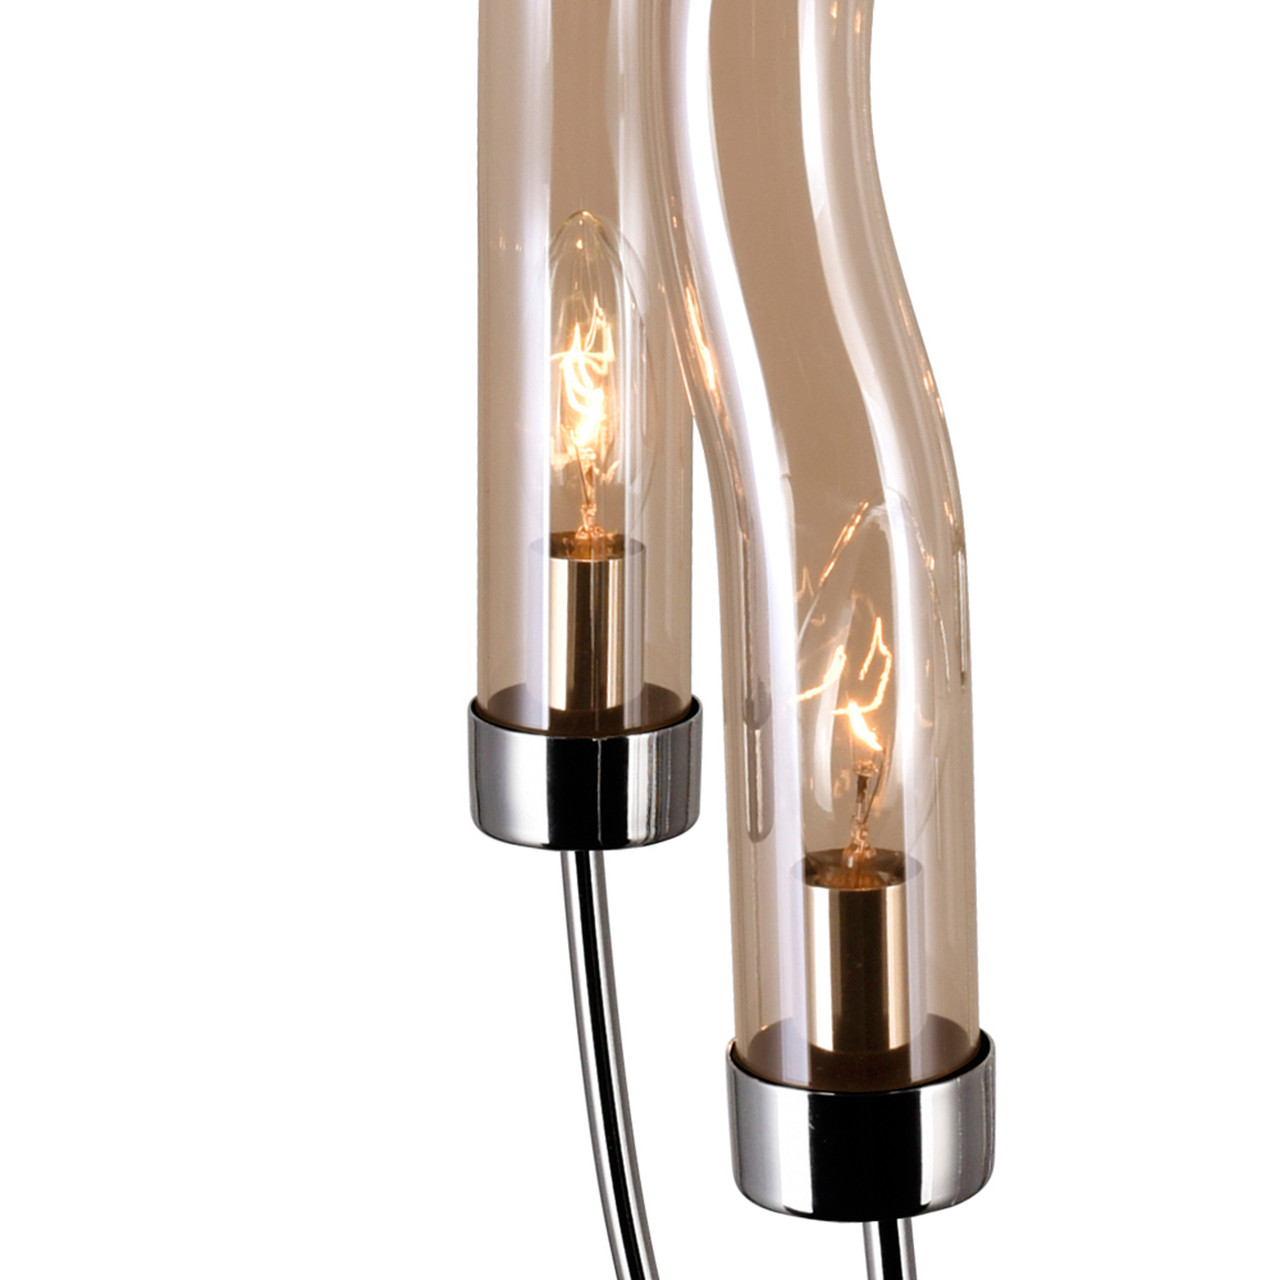 CWI LIGHTING 1203P16-5-613 5 Light Chandelier with Polished Nickel Finish